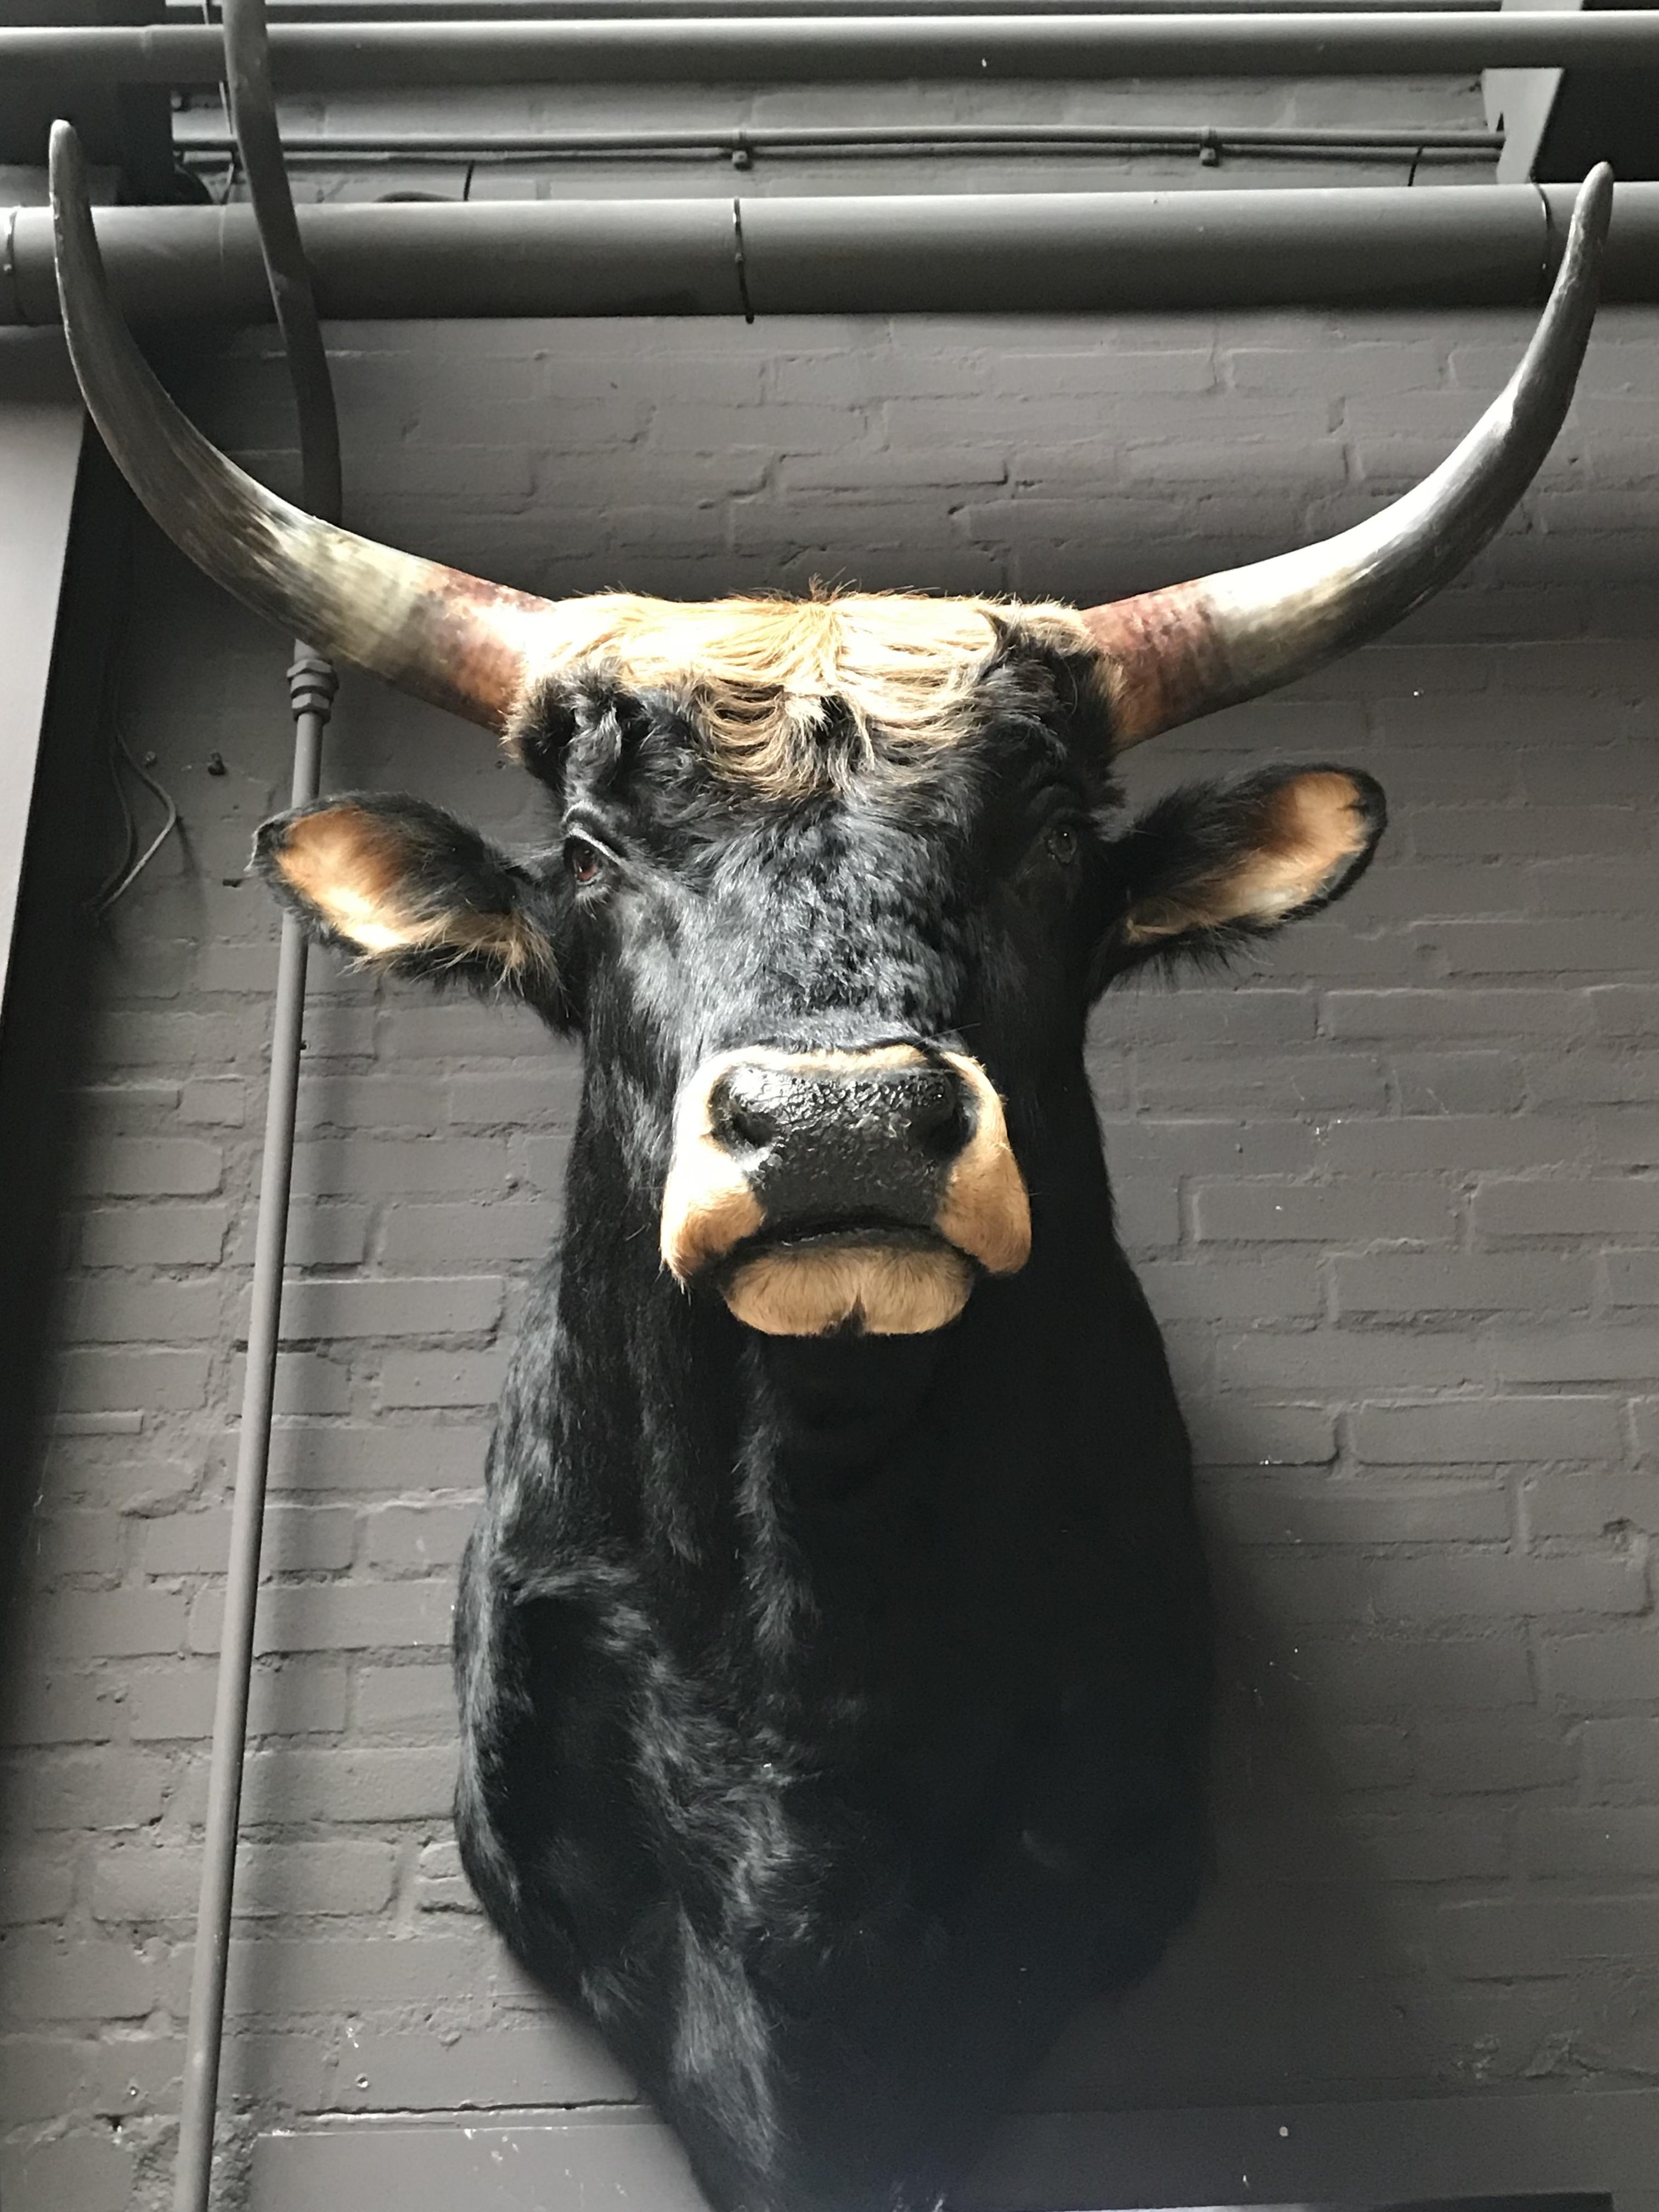 Stuffed head of a huge heck bull. The cow has recently been made and has an imposing appearance.